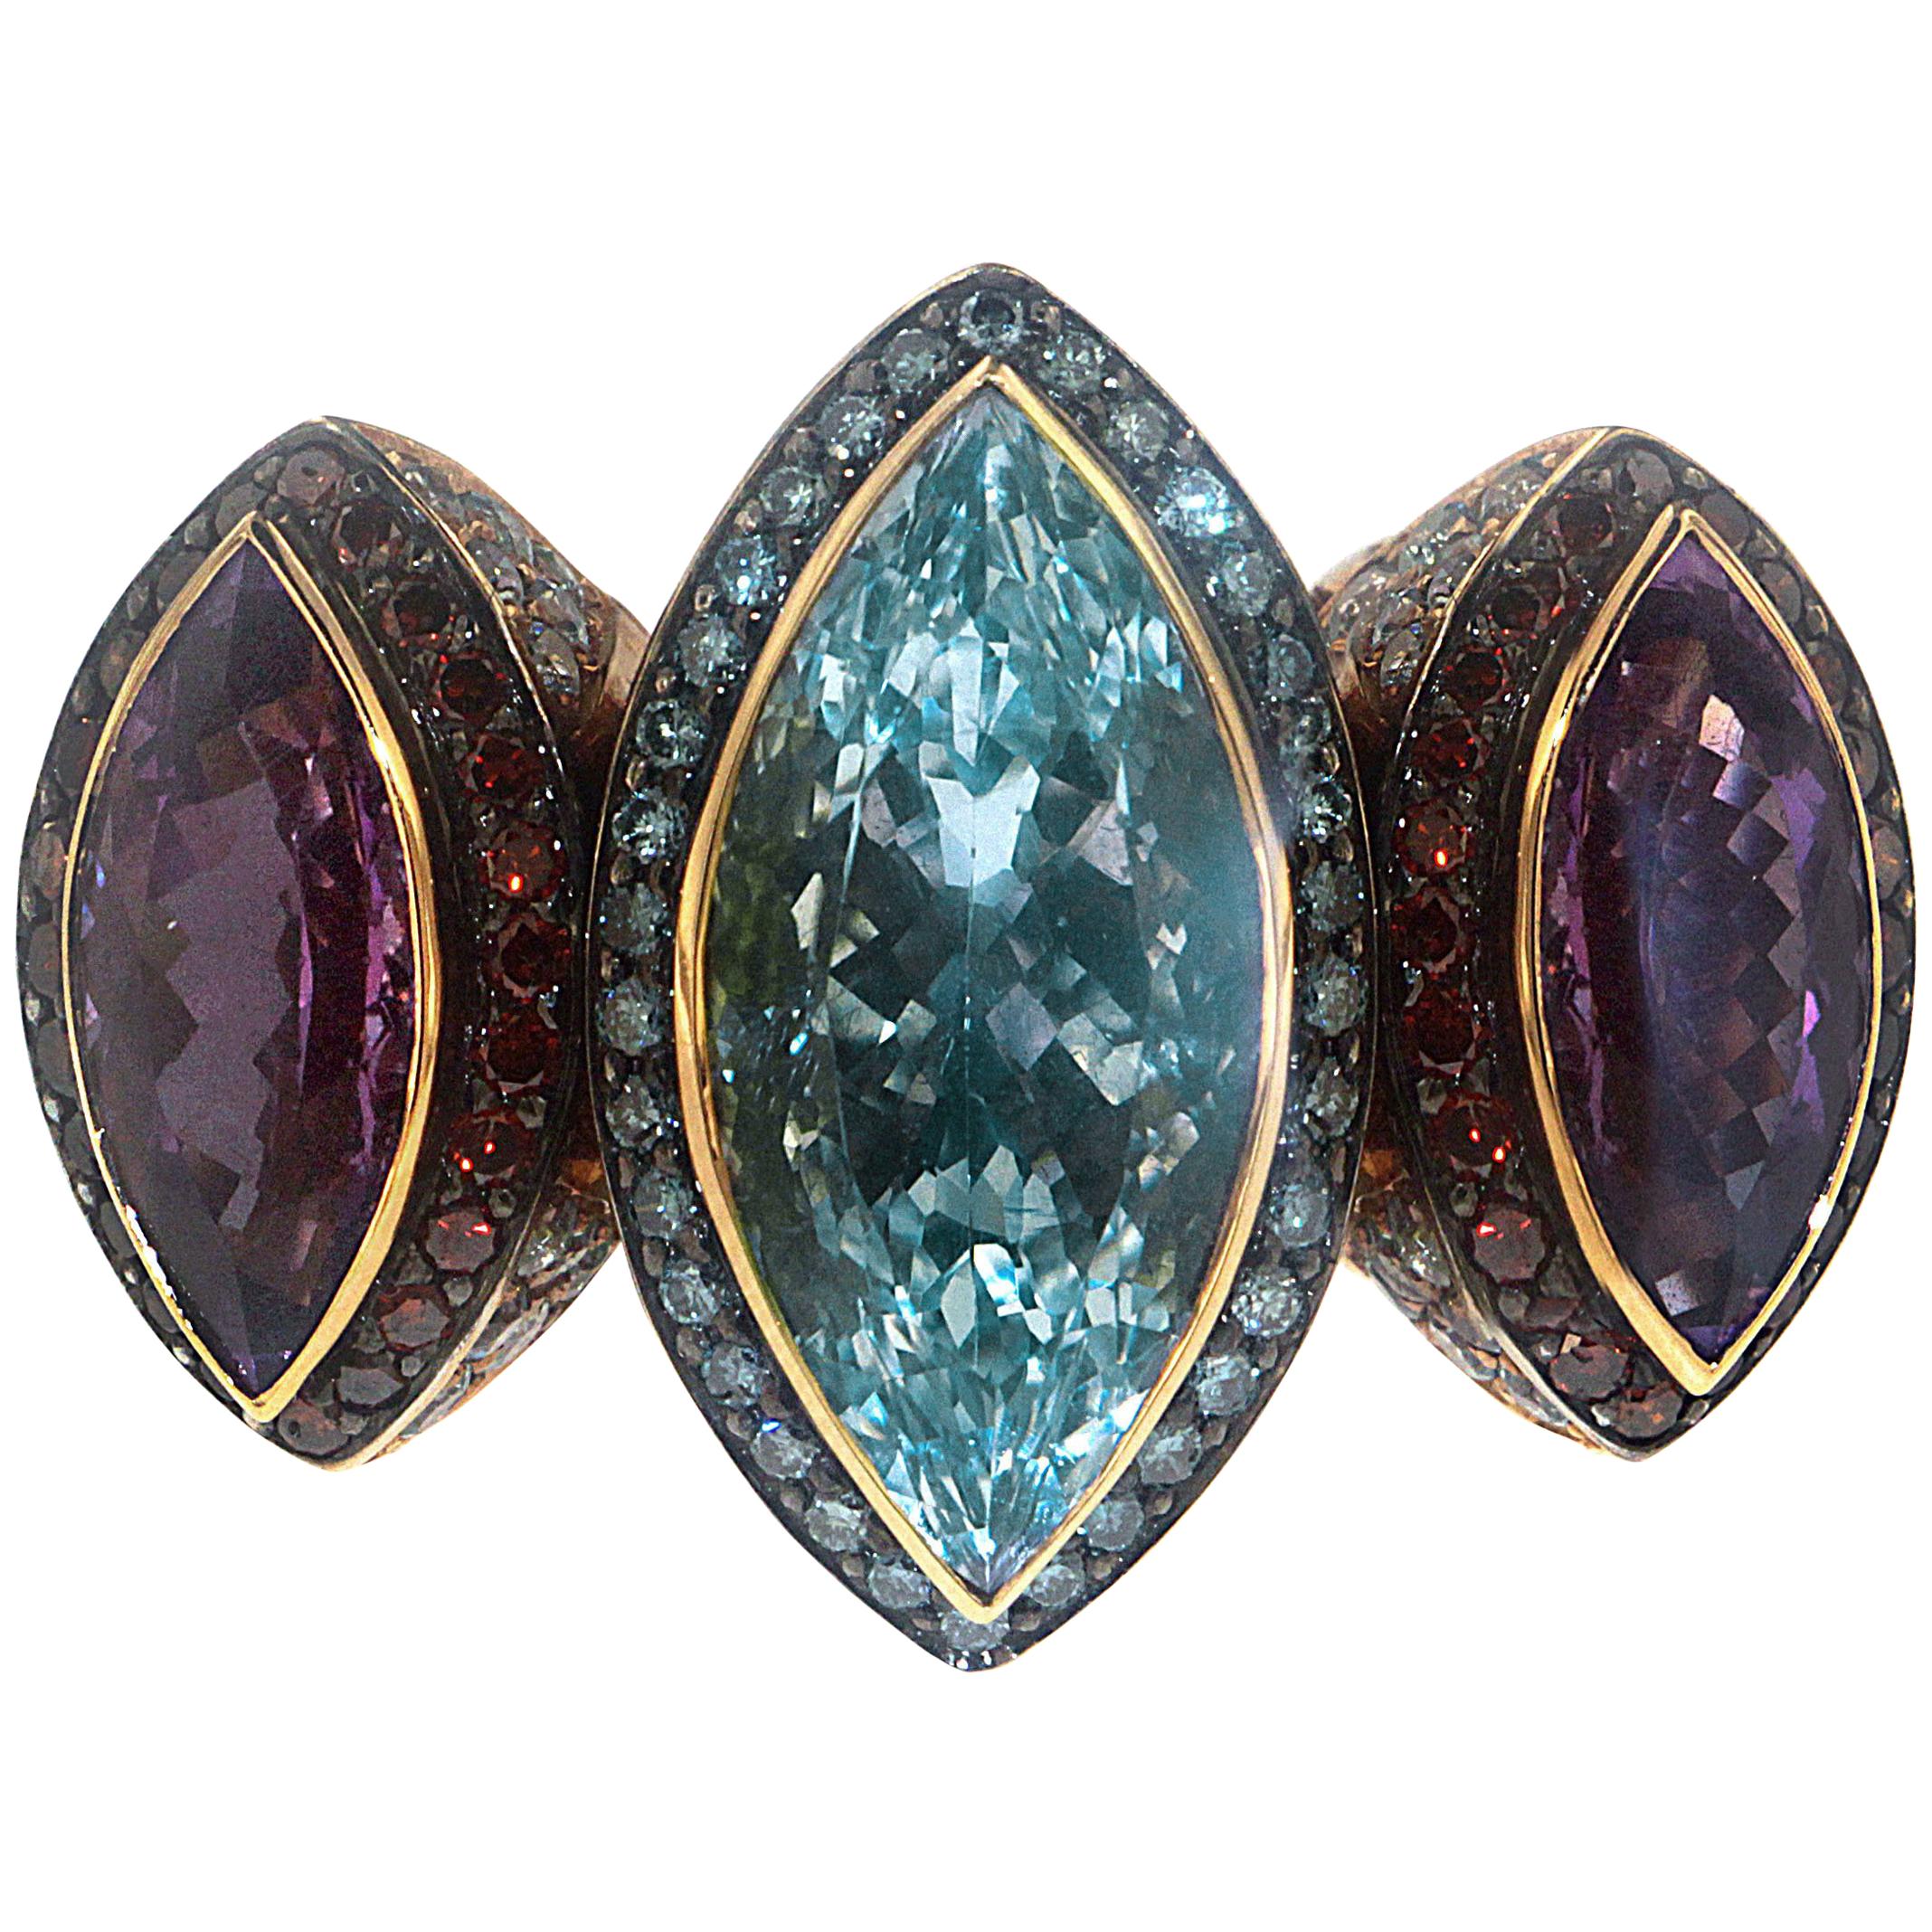 Zorab Creation, the Jezebel Marquis Amethyst and Blue Topaz Ring